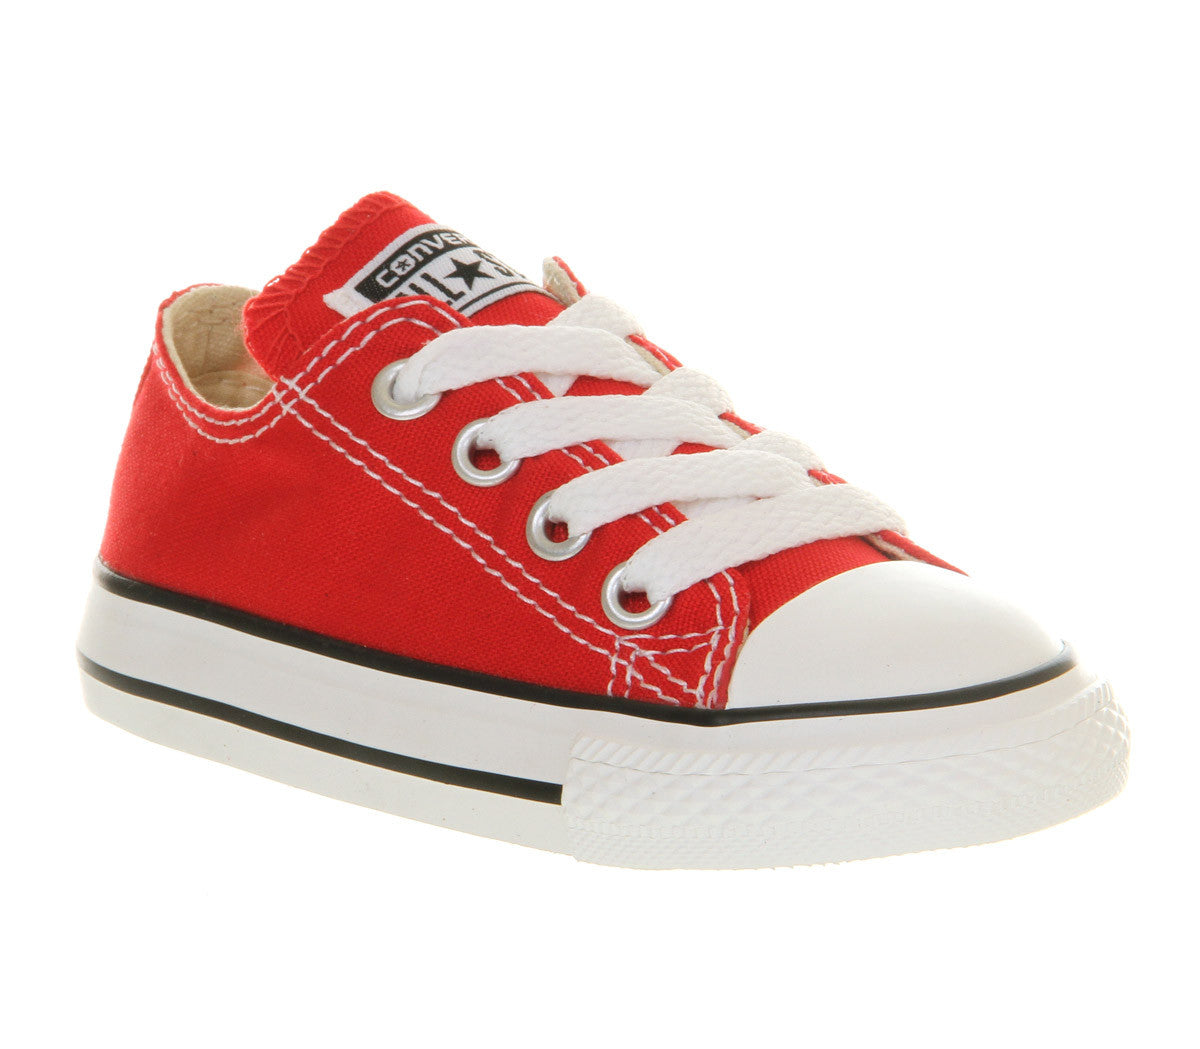 Infant Converse All Stars canvas trainers Black or Red junior